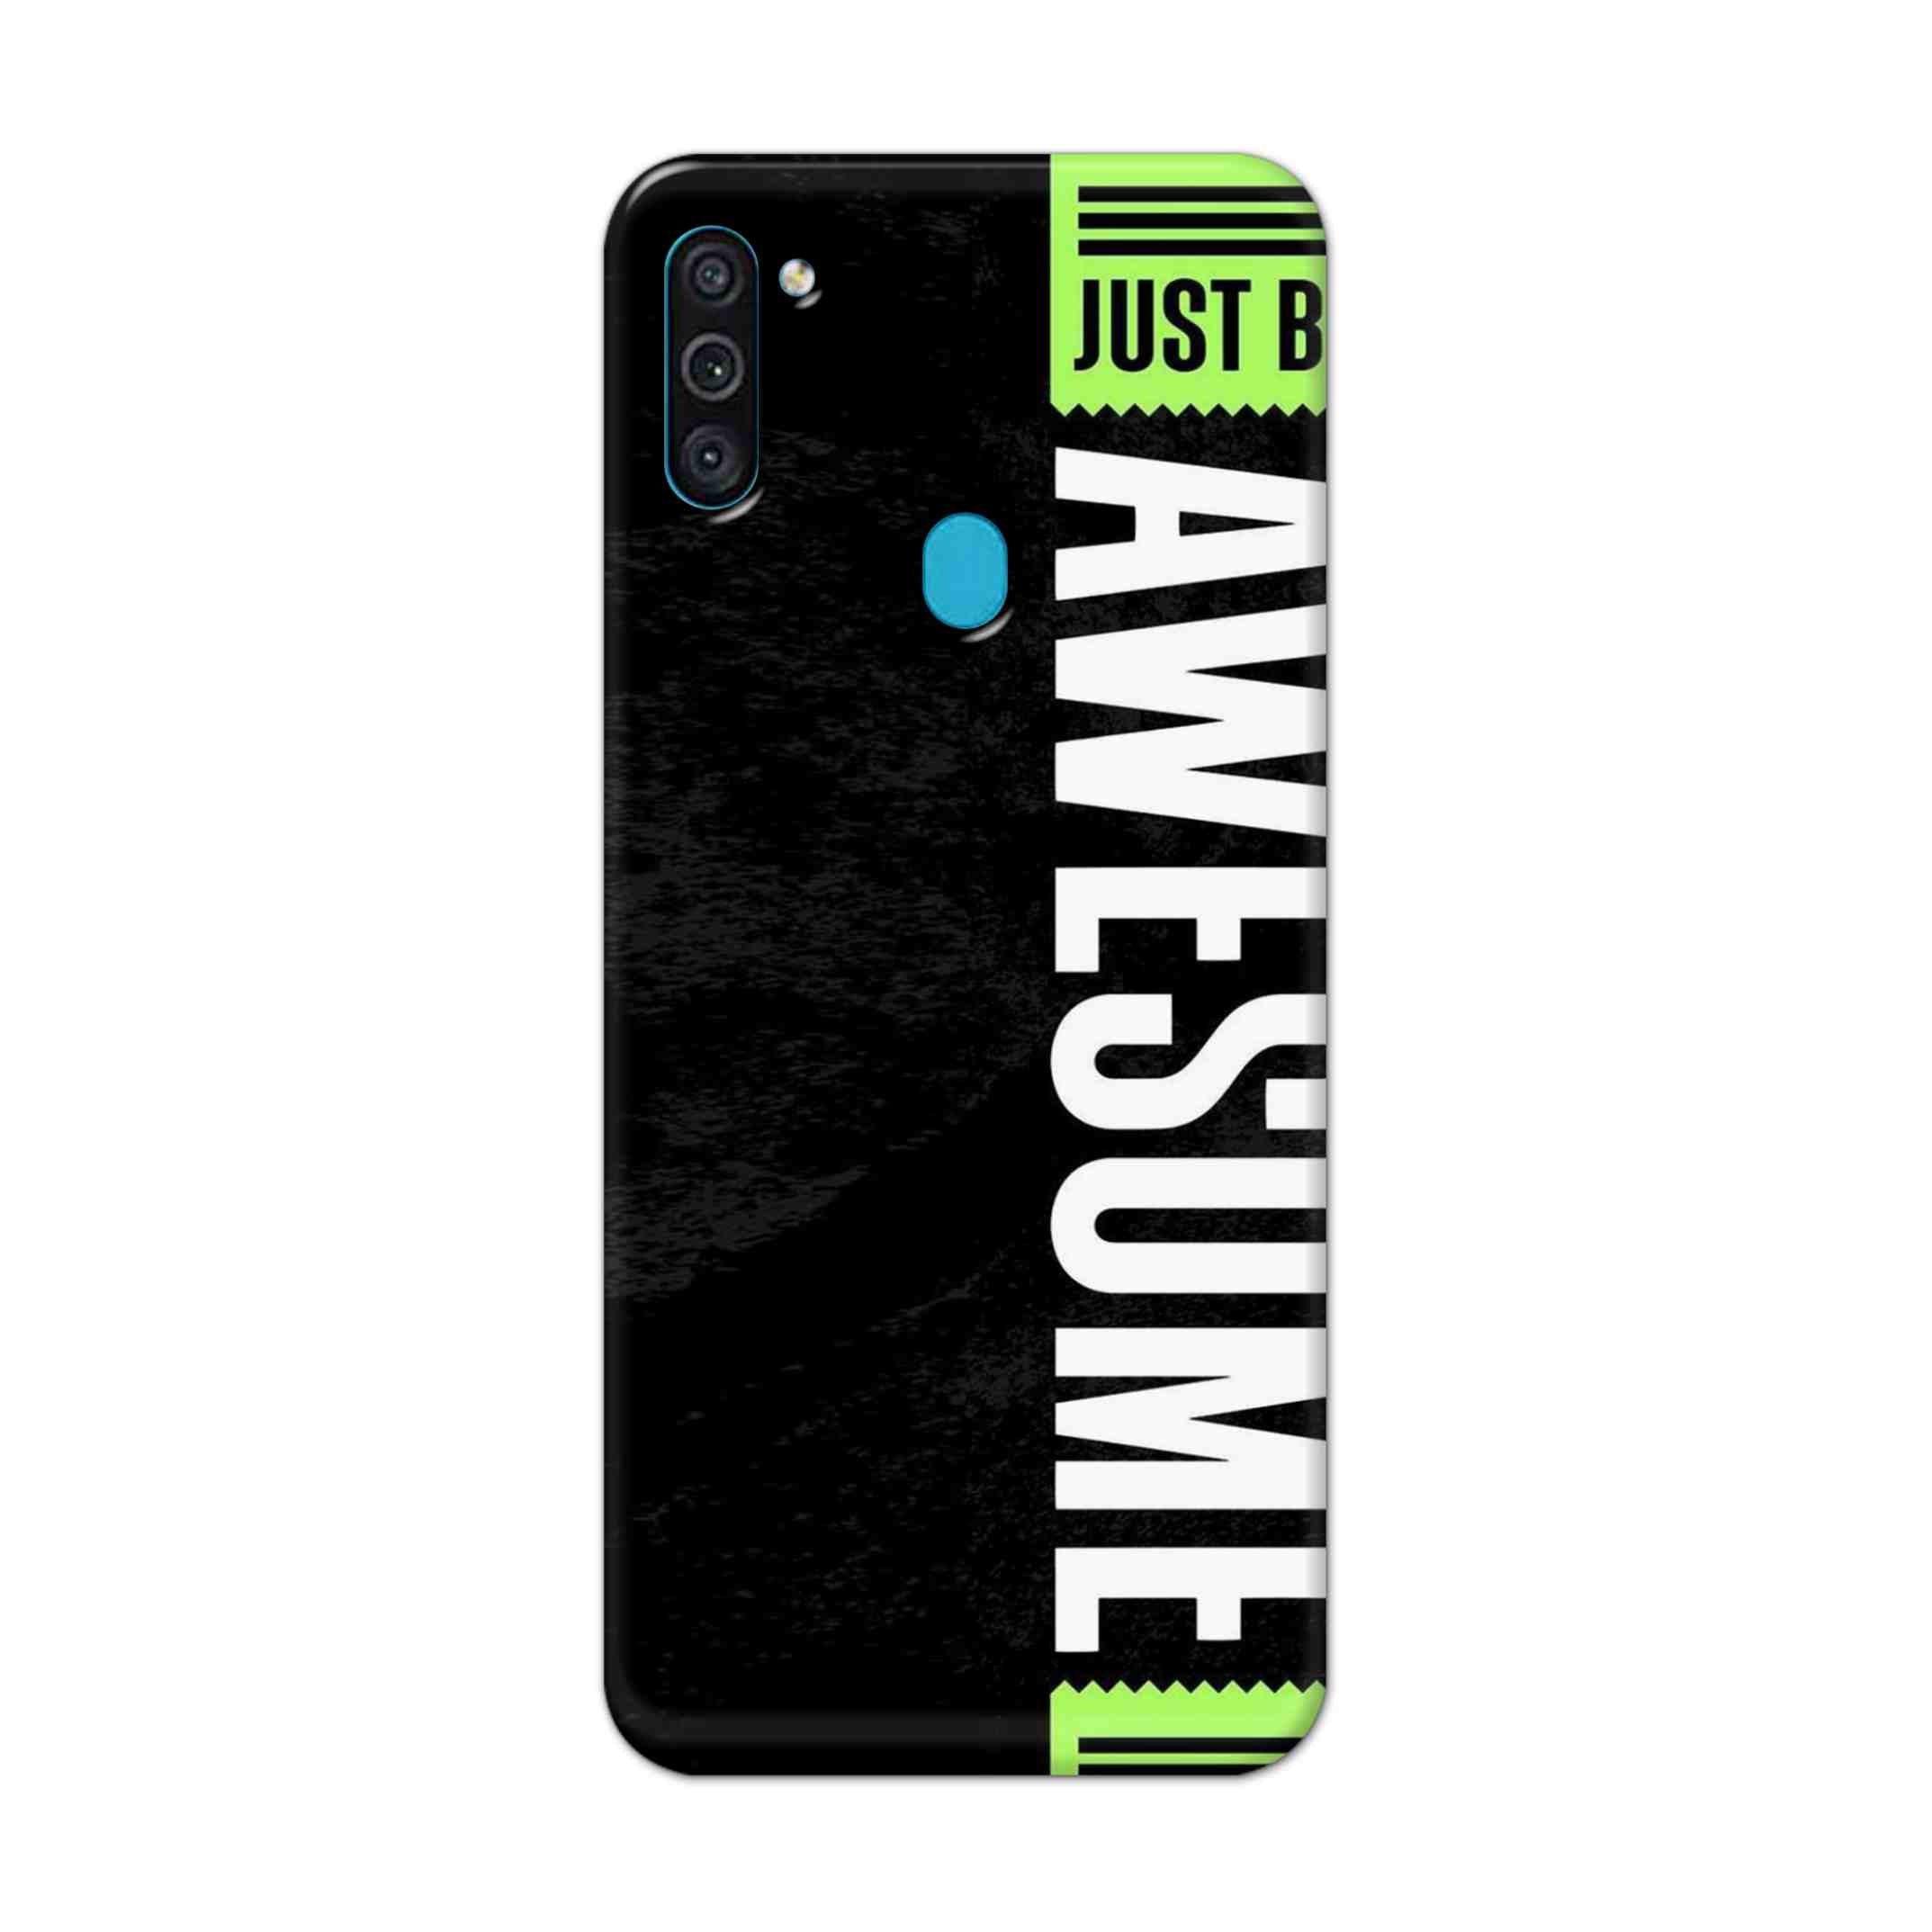 Buy Awesome Street Hard Back Mobile Phone Case Cover For Samsung Galaxy M11 Online